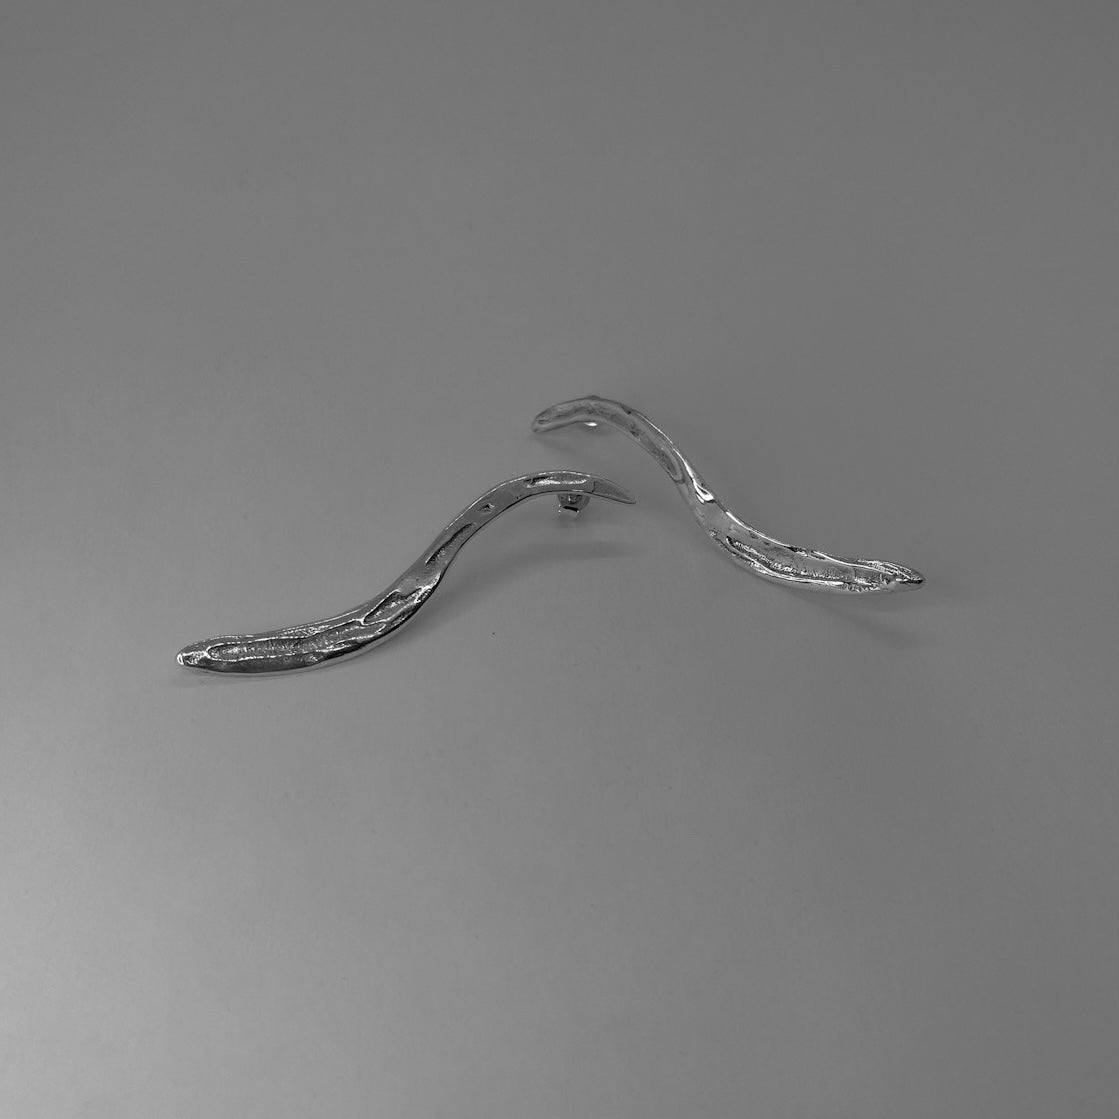 Long, wavy, carved earrings, handmade and crafted from sterling silver 925